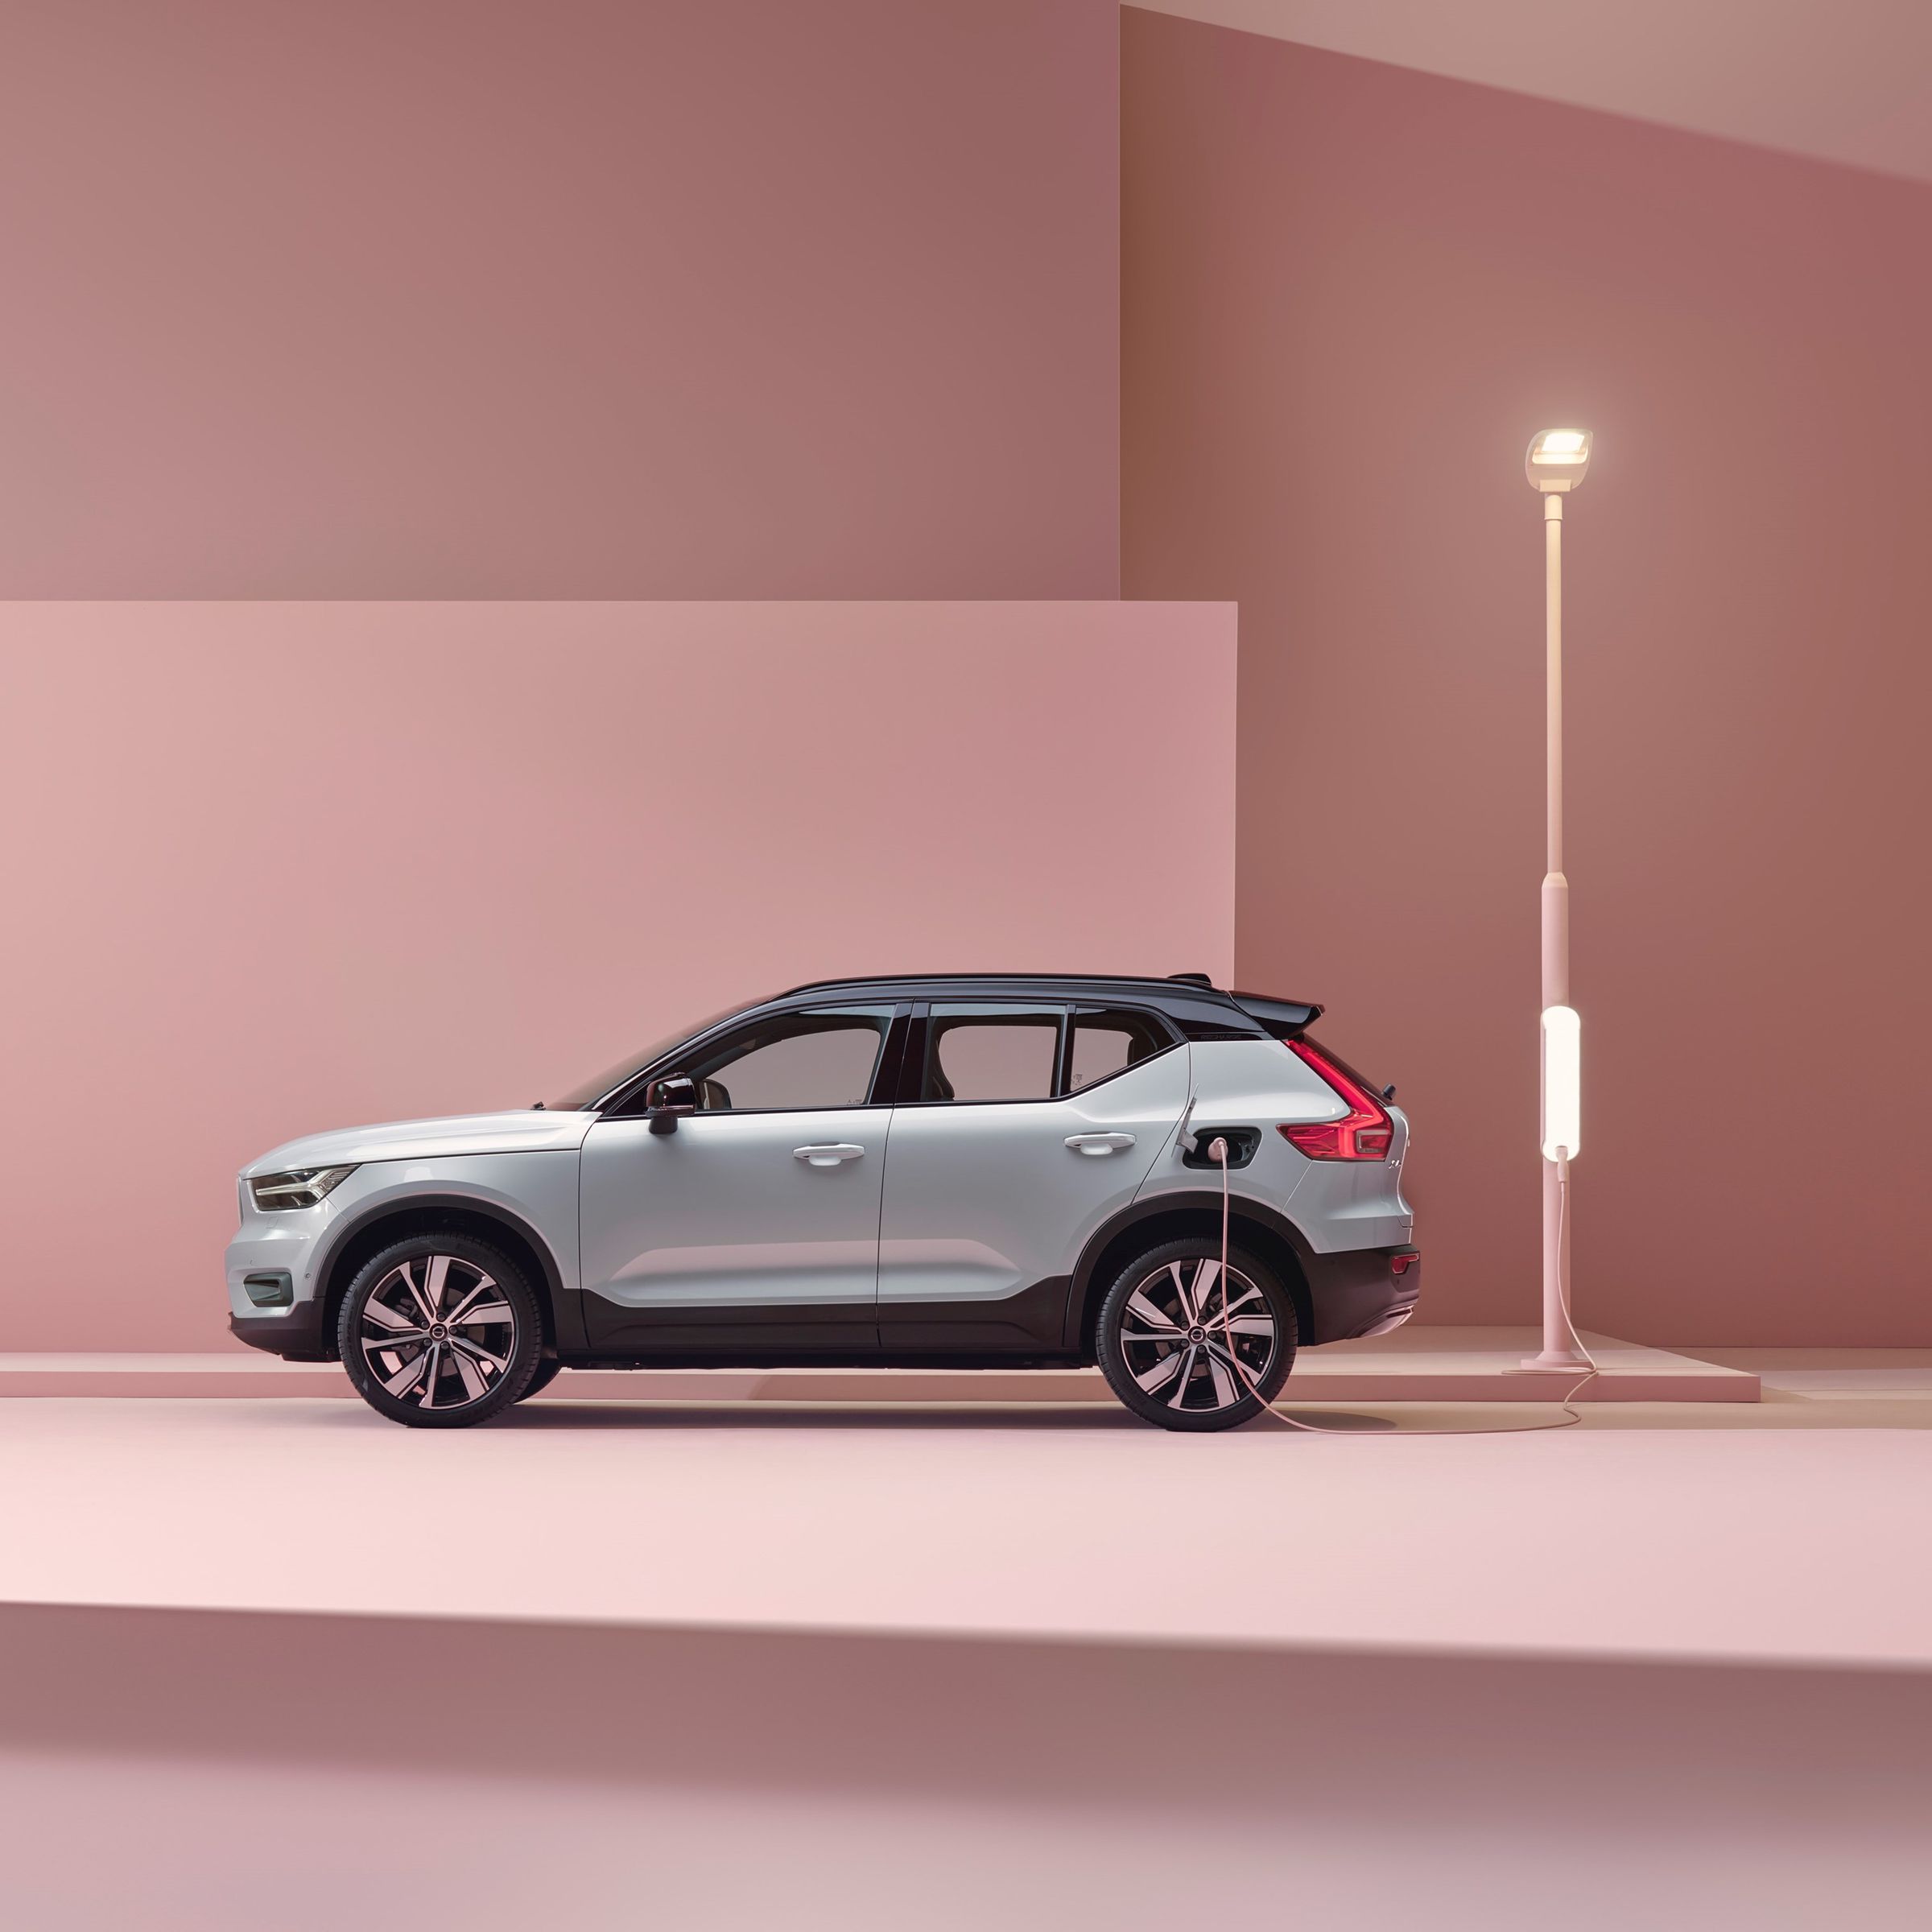 Volvo unveiled its first fully electric car, the XC40, in 2019. 